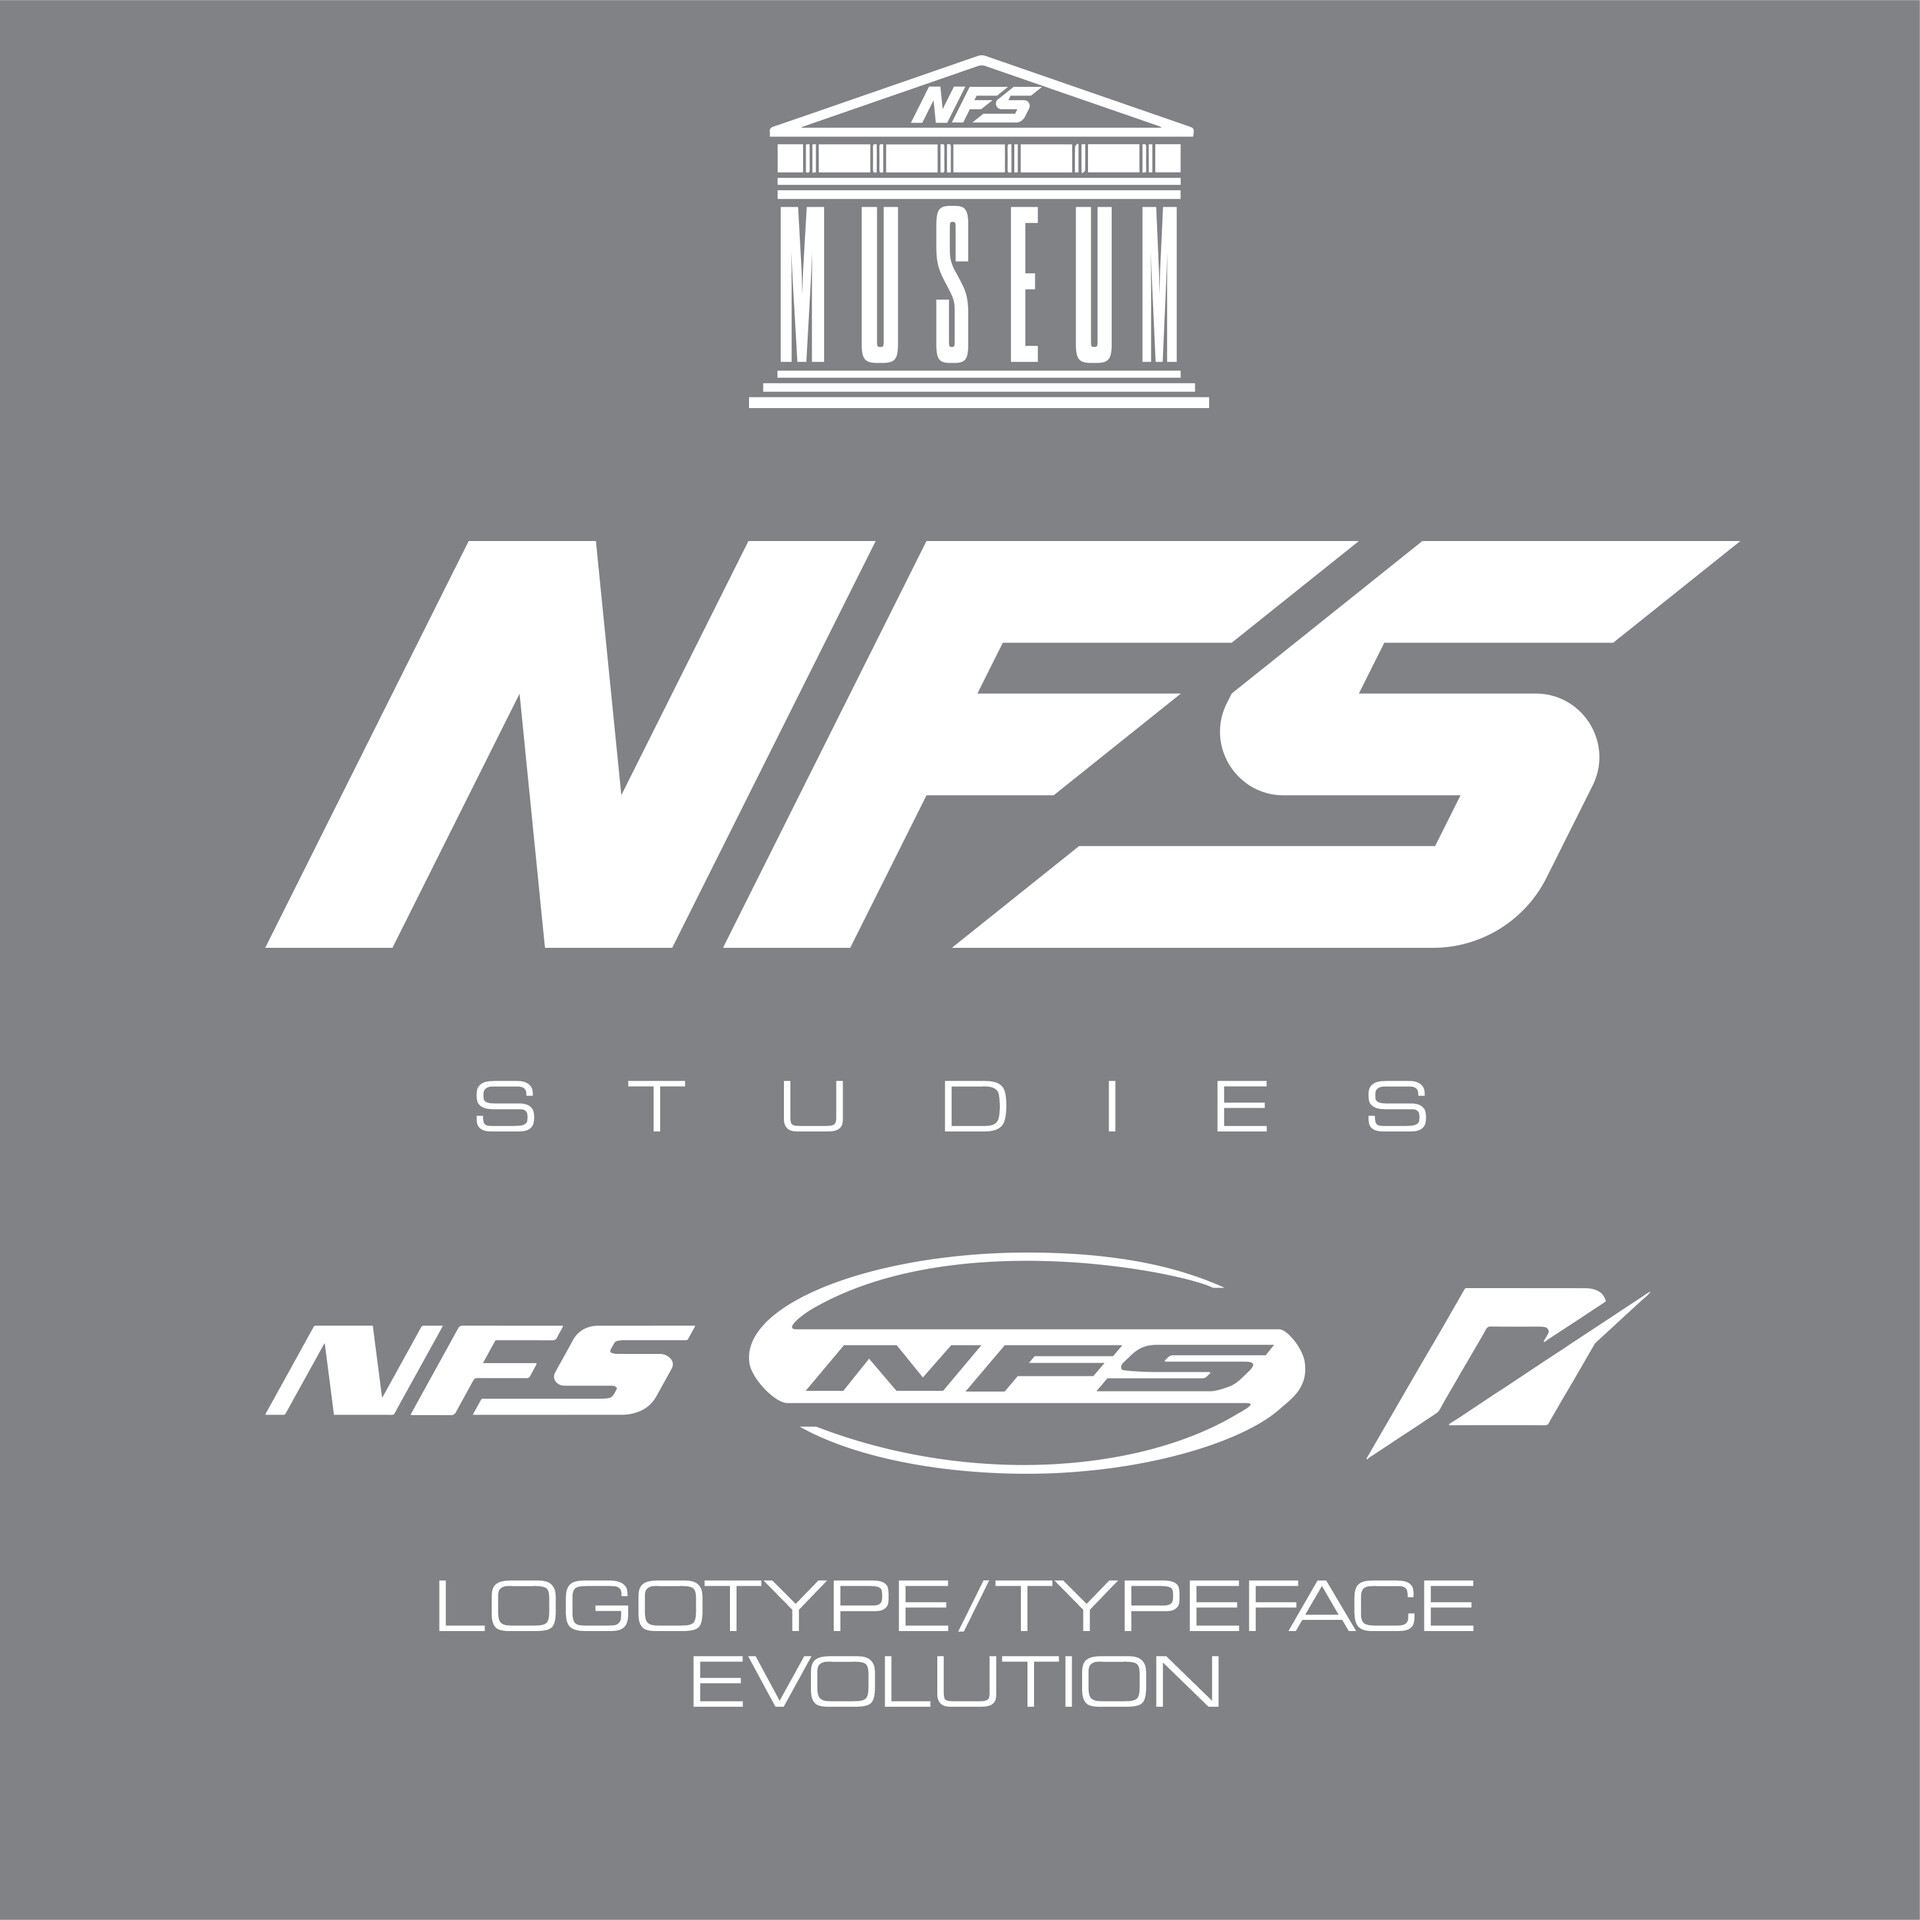 Nfsw Projects  Photos, videos, logos, illustrations and branding